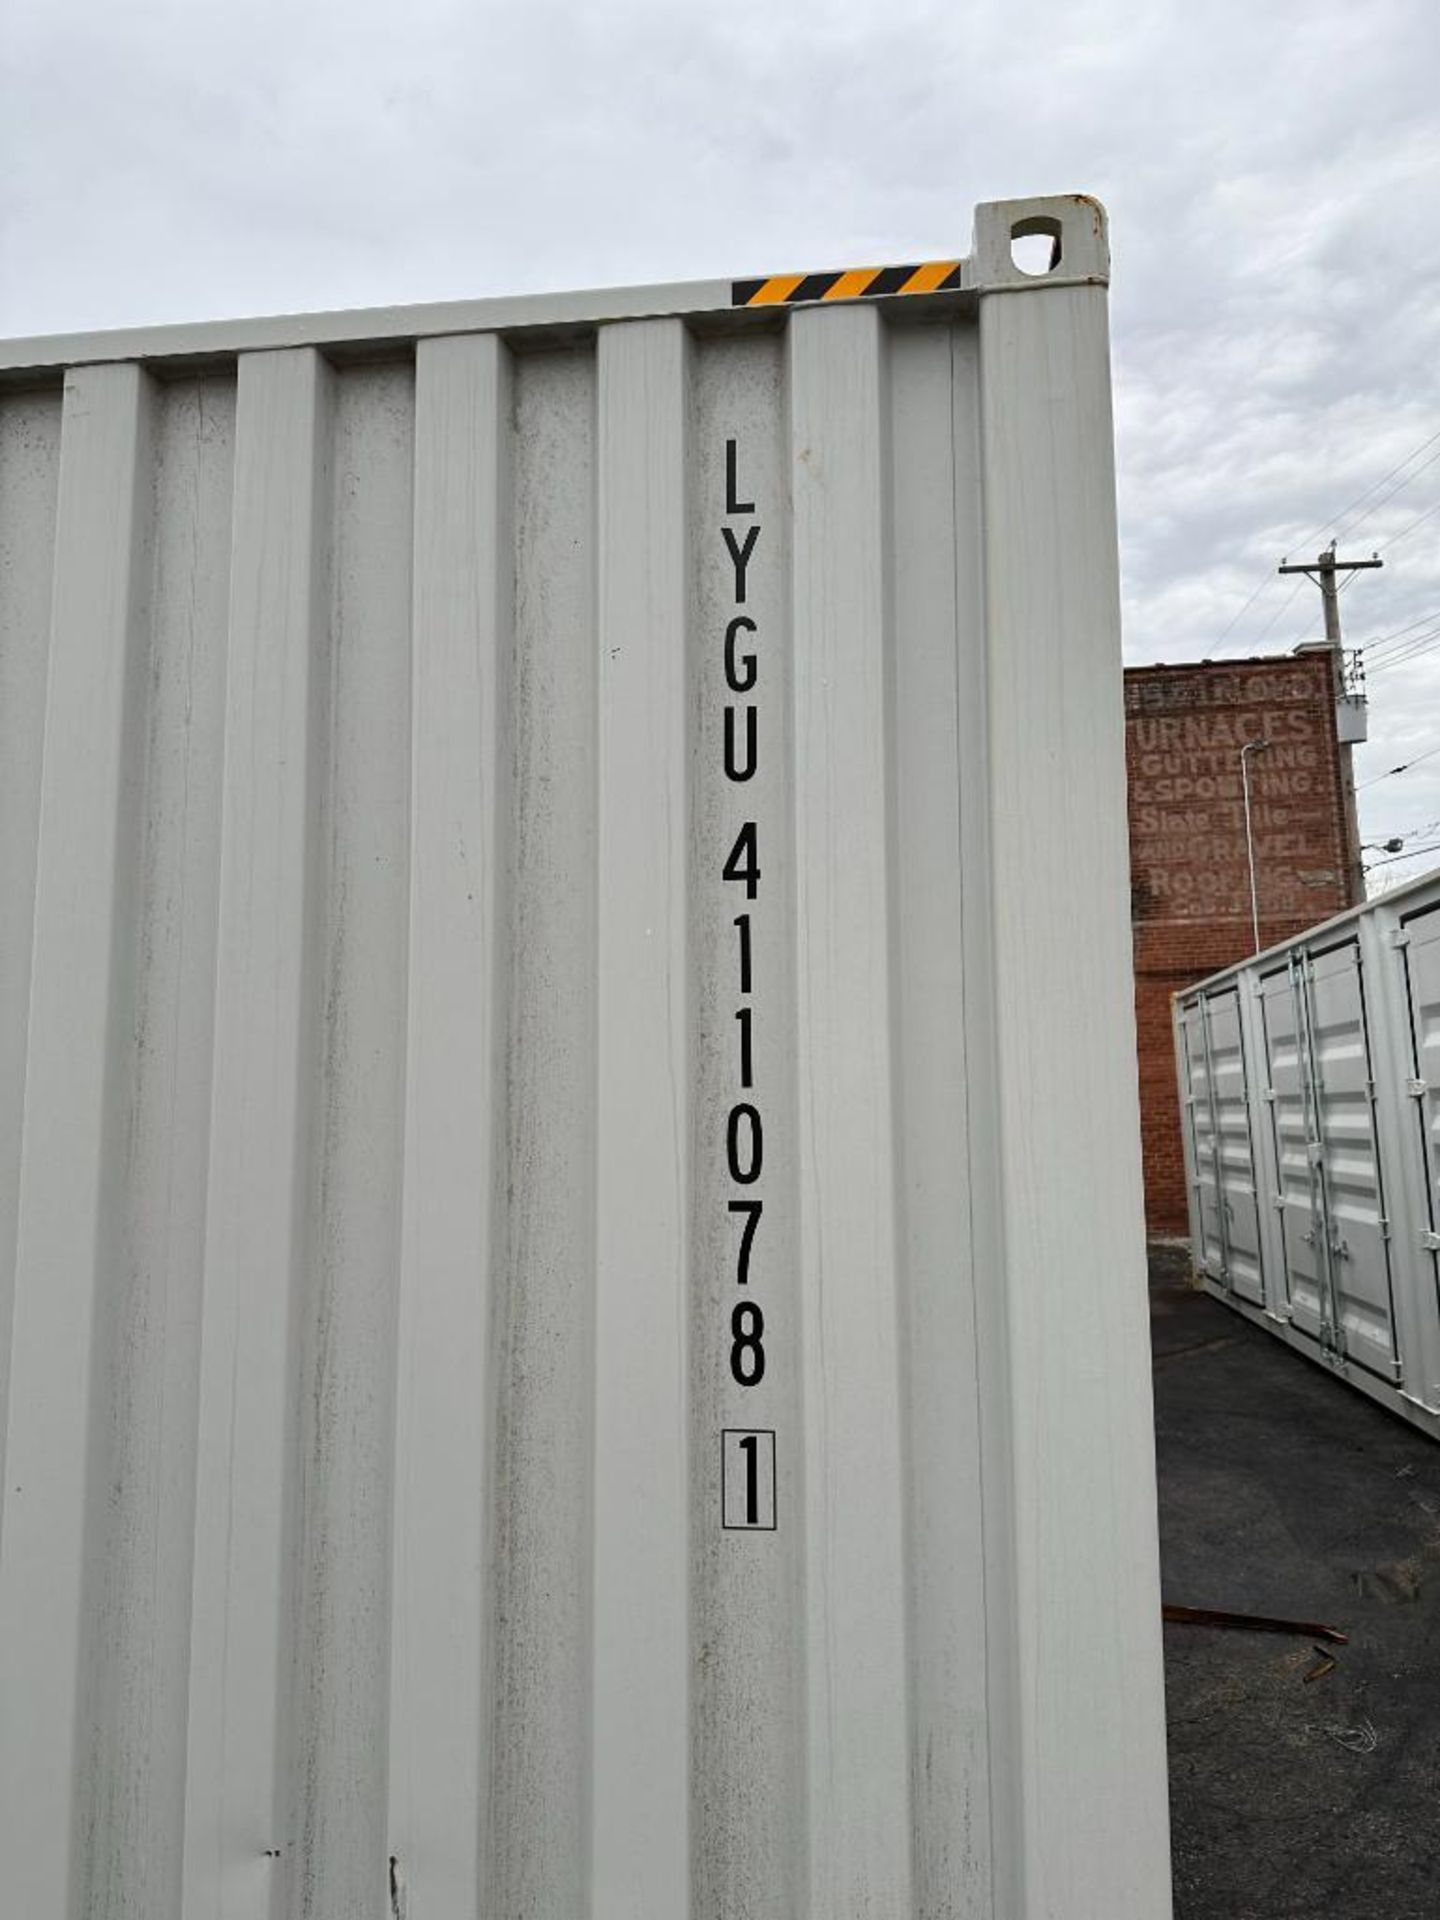 2022 40FT MULTI-DOOR SHIPPING CONTAINER BRAND/MODEL: LYGU 45G3 INFORMATION: NEW,2022 STORAGE CONTAIN - Image 8 of 23